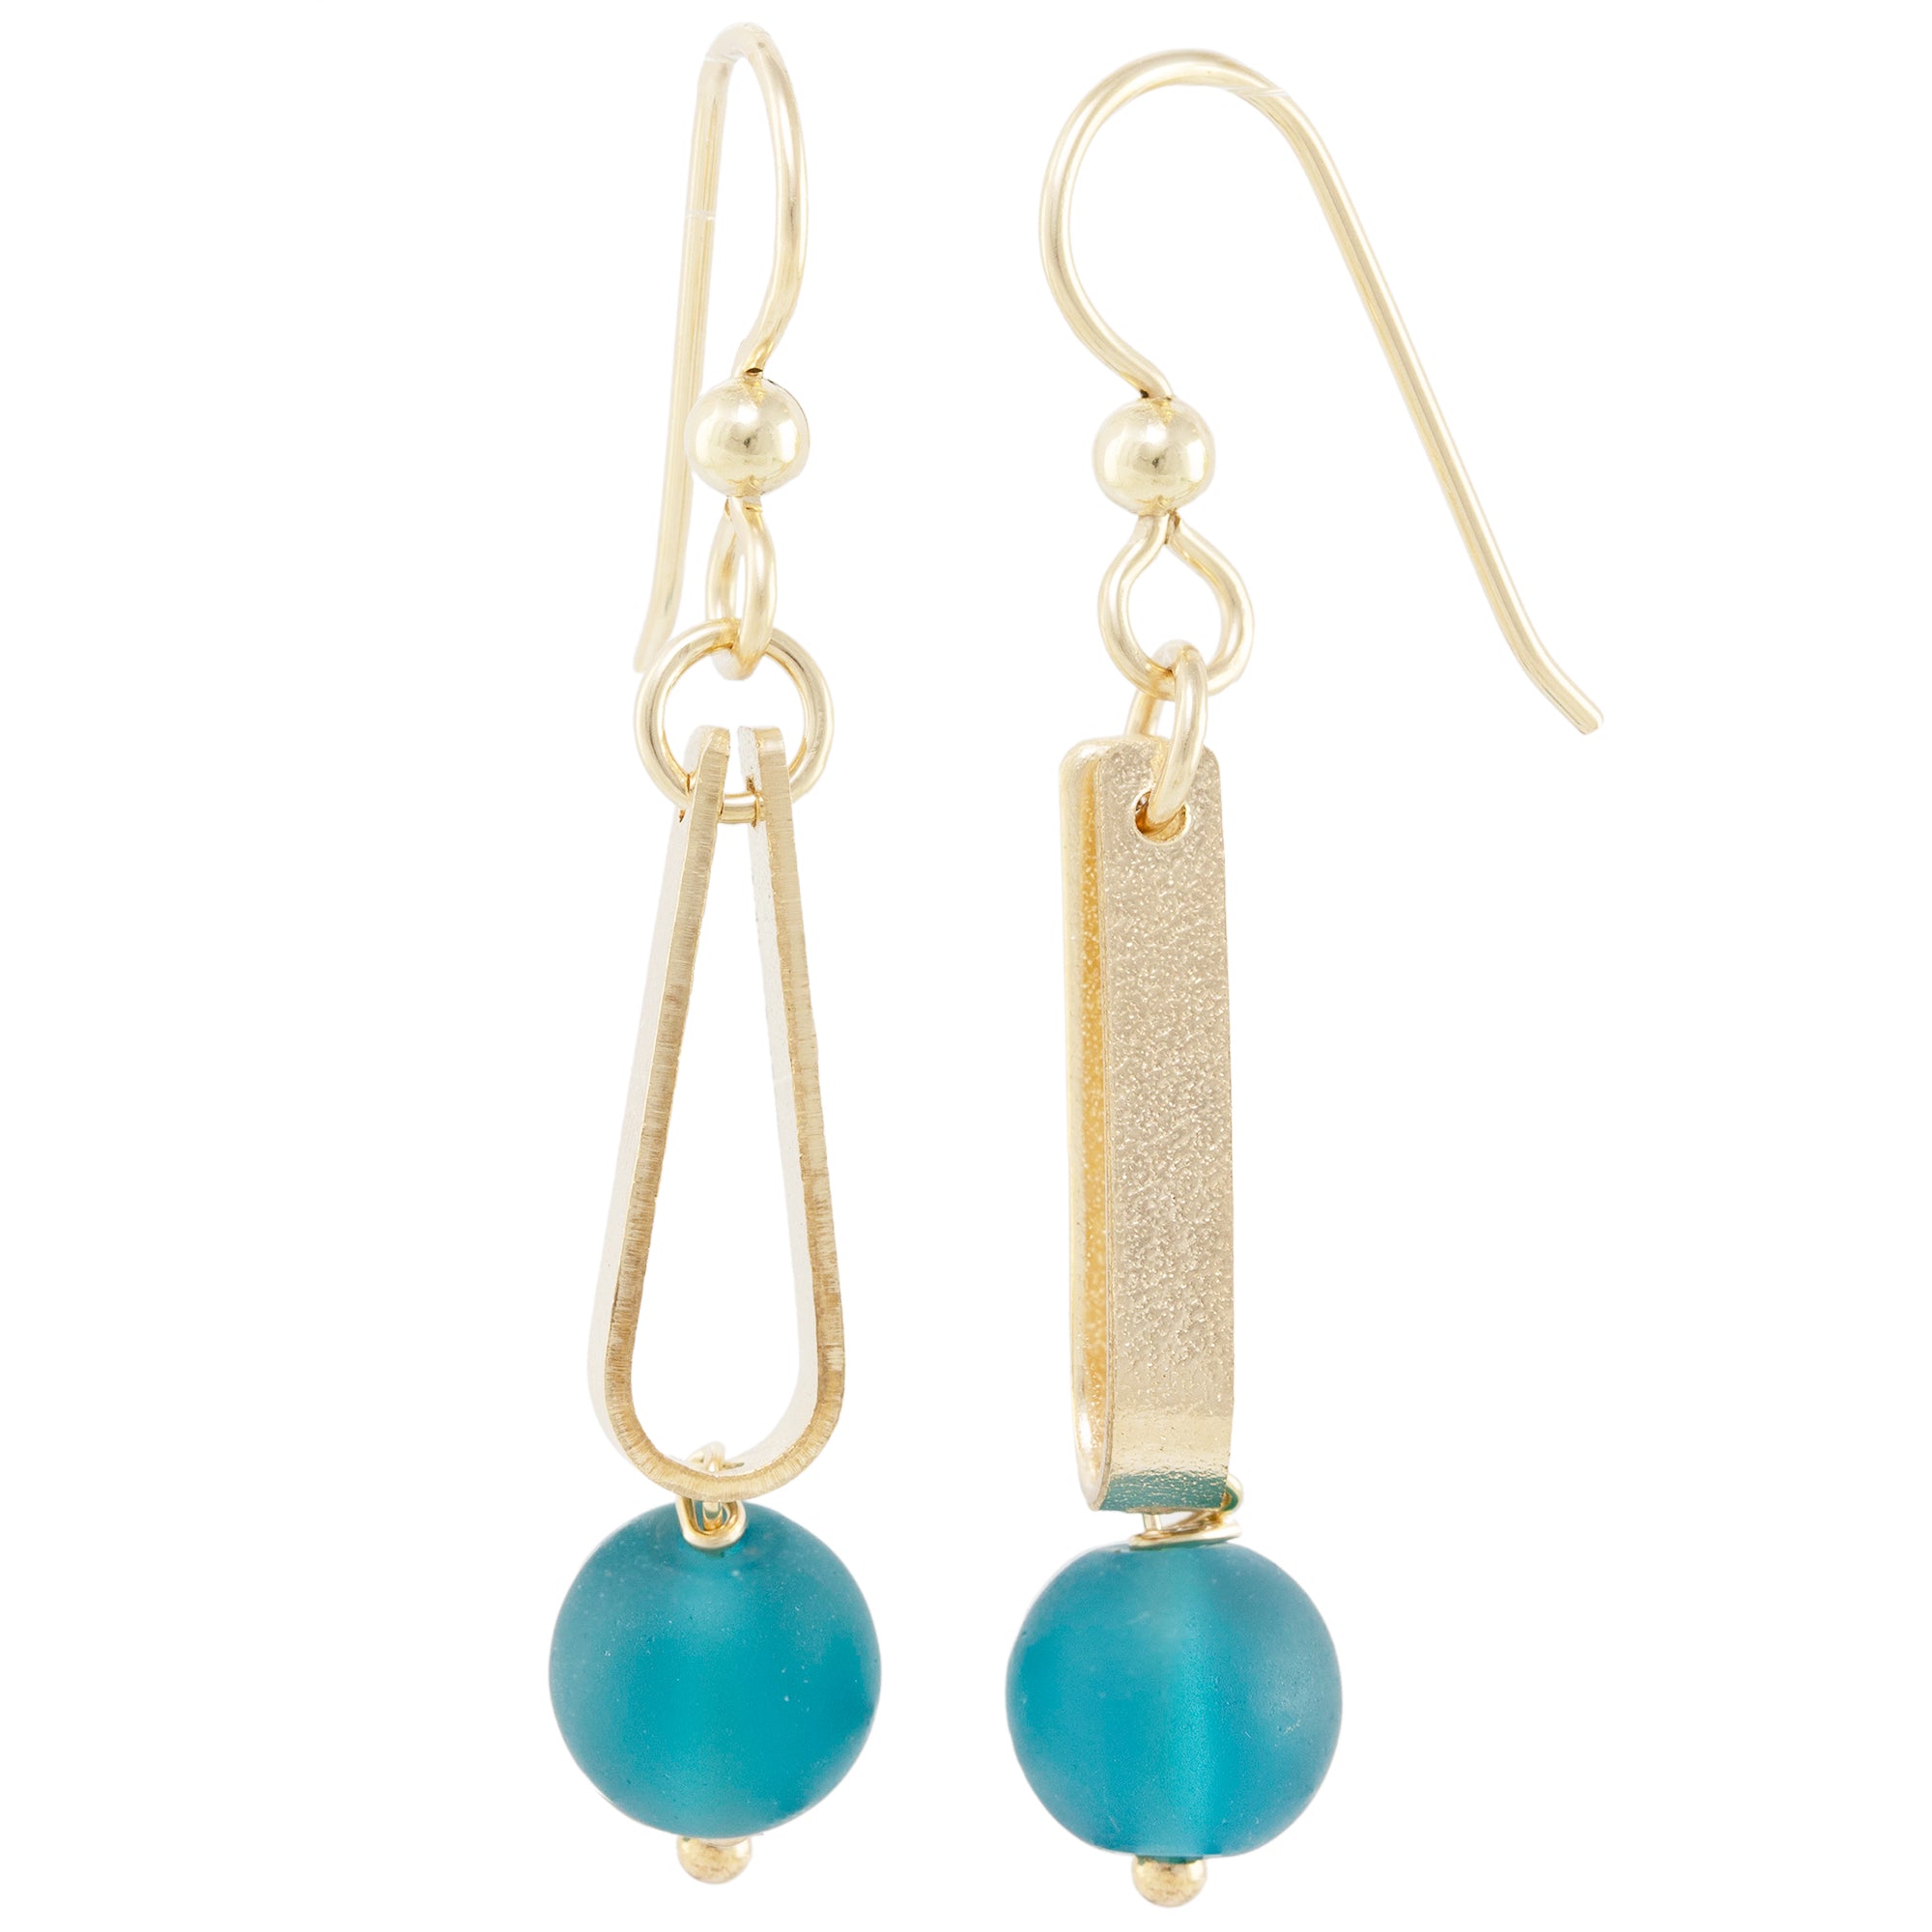 Teal Peacock Blue Round Recycled Glass Ball and 14K Gold Fill Teardrop Shaped Dangle Earrings